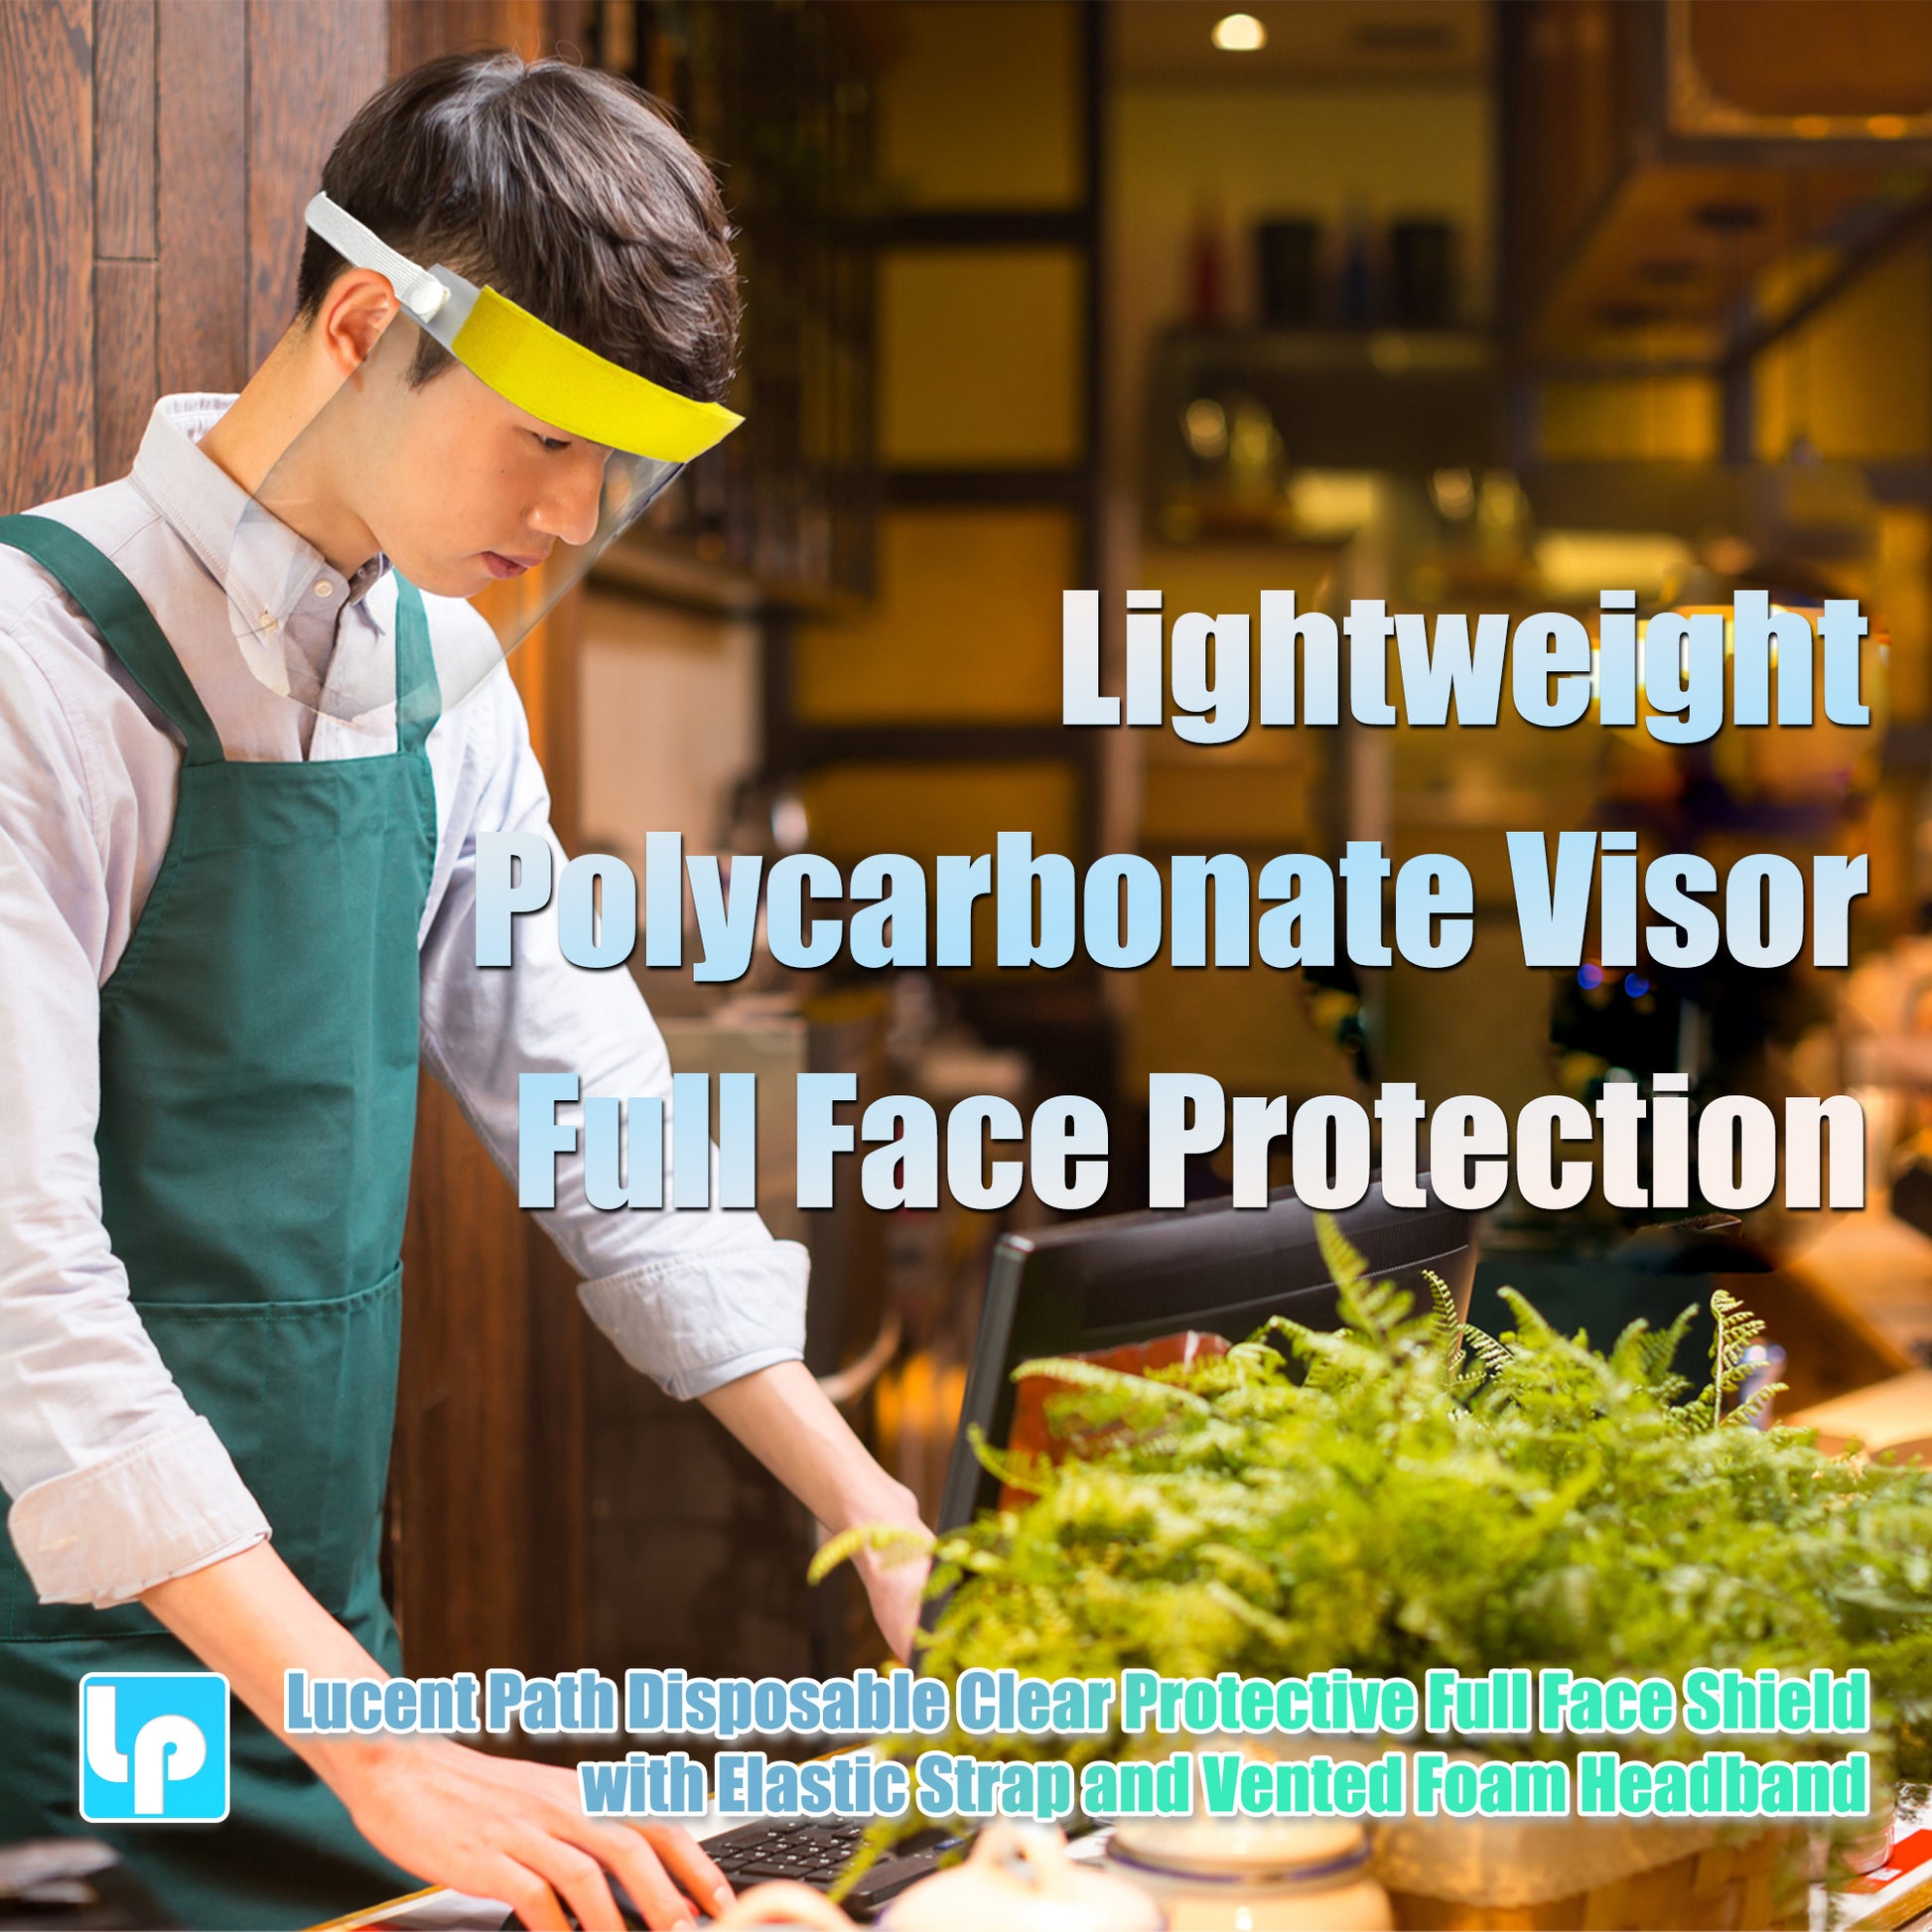 Lucent Path Disposable Clear Protective Full Face Shield with Elastic Strap and Vented Foam headband